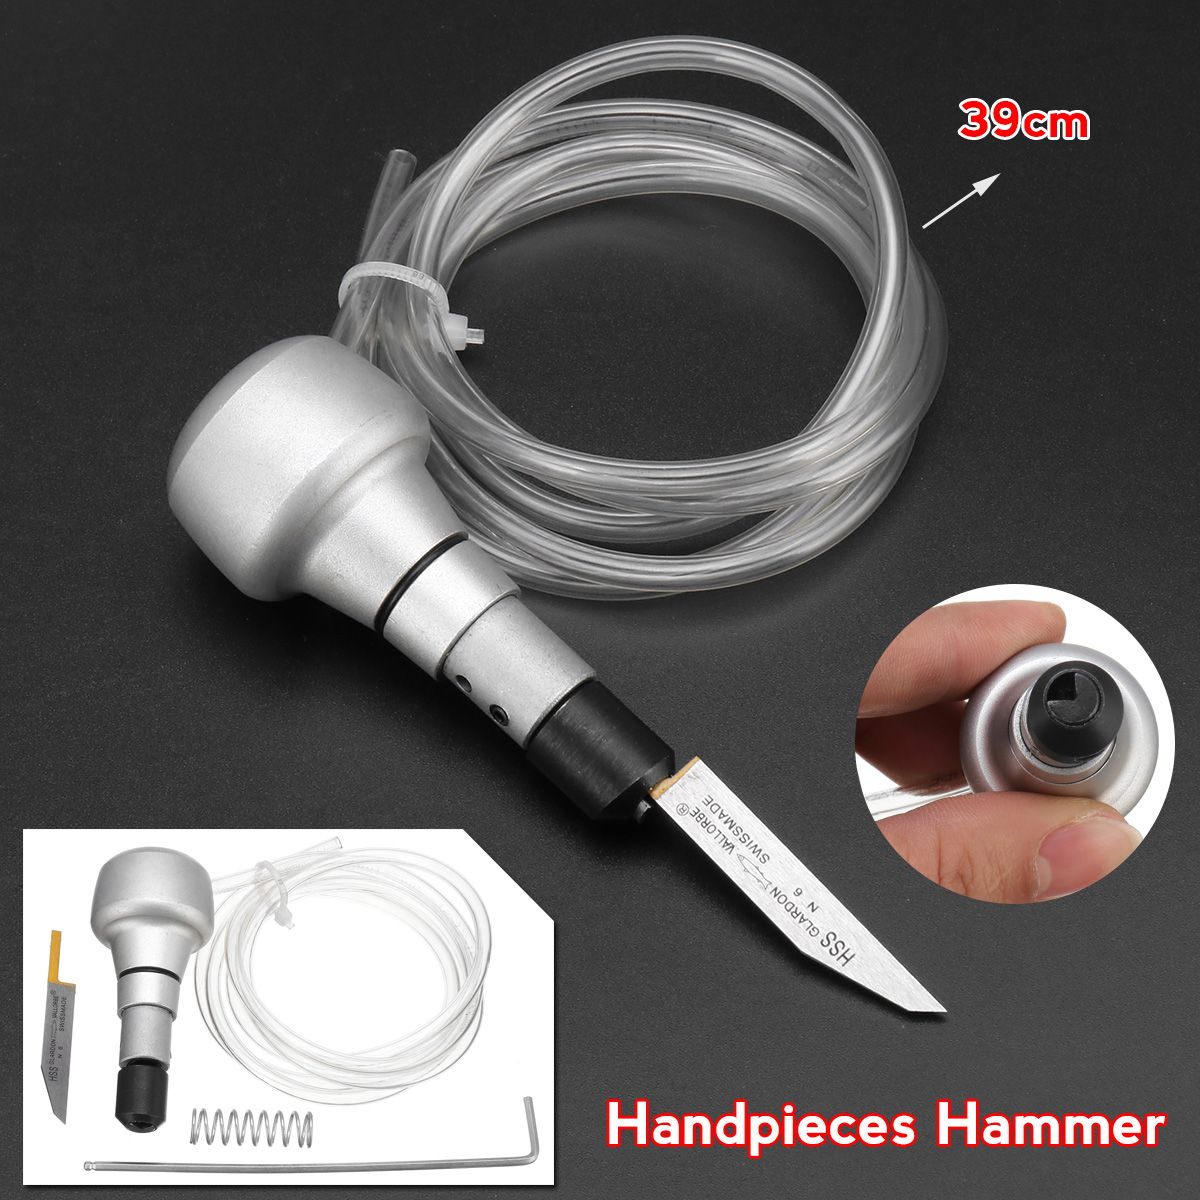 Jewelry-Making-Engraving-Tools-Graver-Max-Handpieces-Hammer-for-Engraving-Pneumatic-1424685